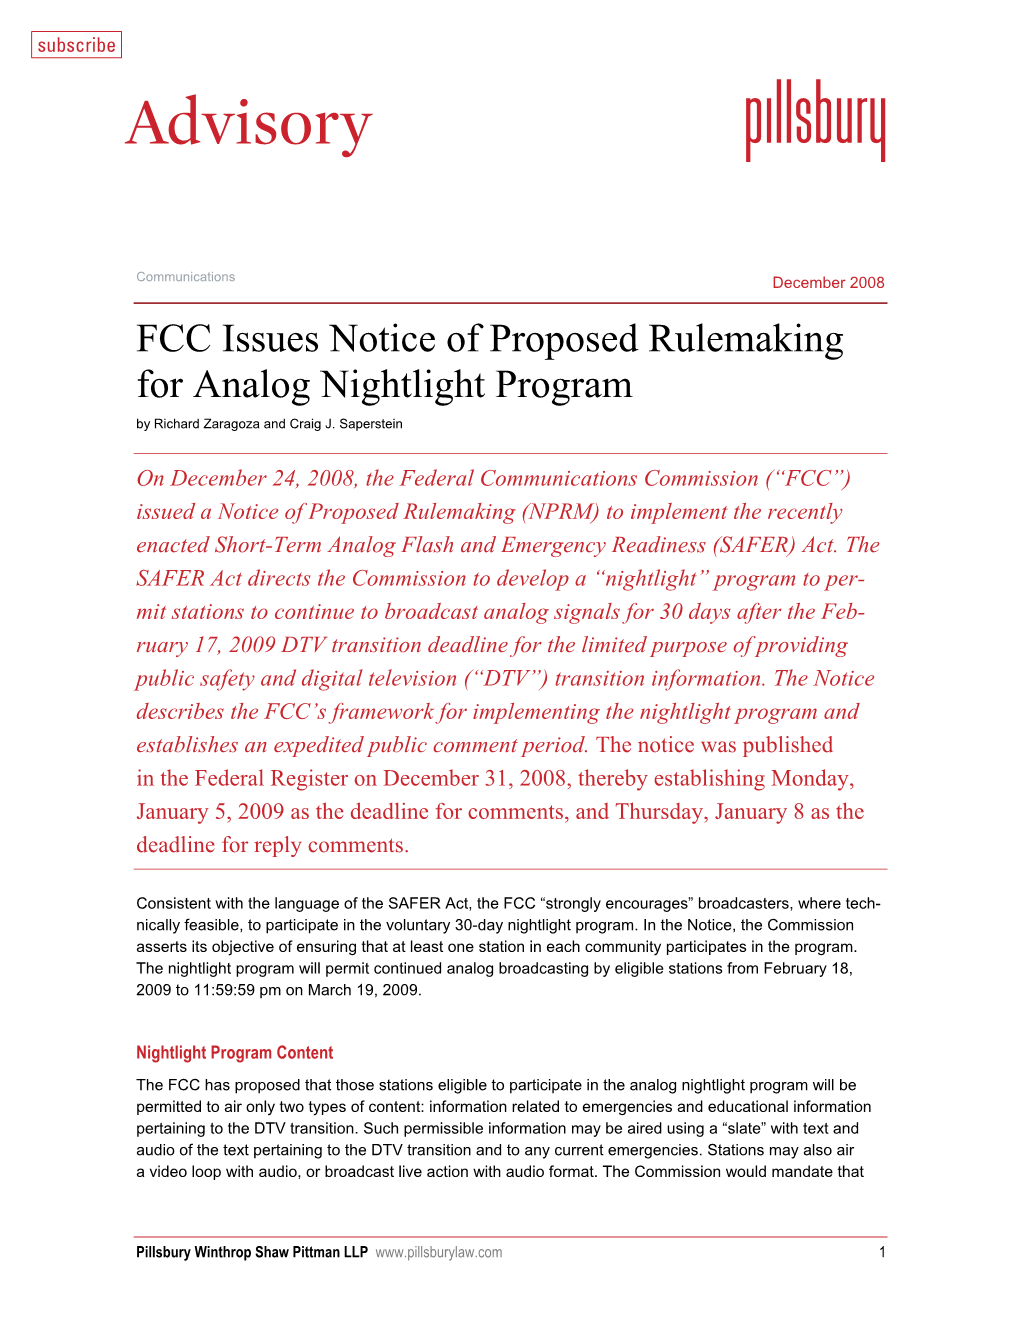 FCC Issues Notice of Proposed Rulemaking for Analog Nightlight Program by Richard Zaragoza and Craig J